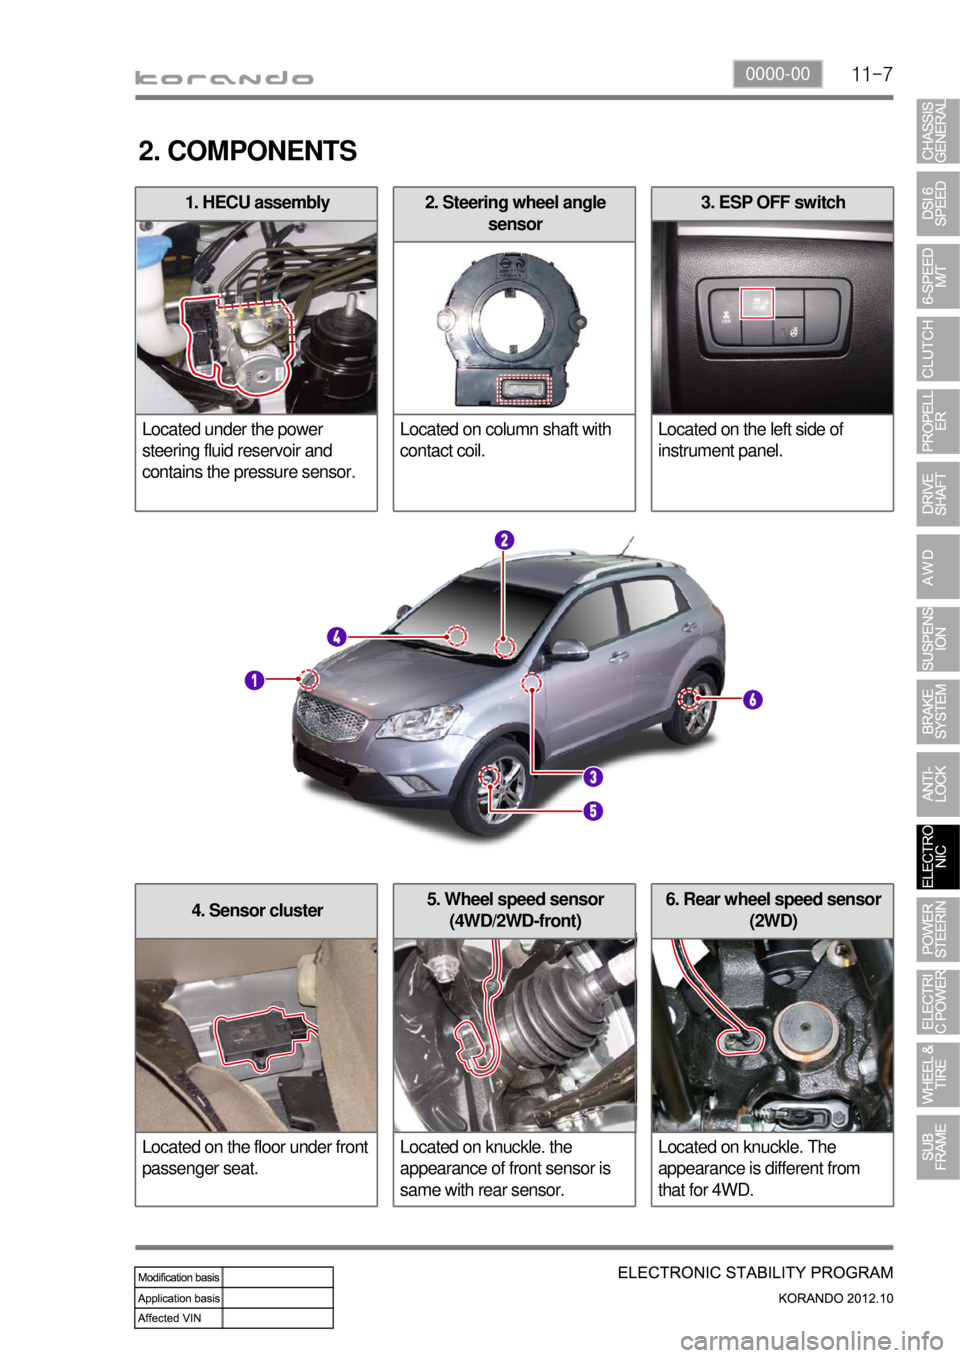 SSANGYONG KORANDO 2012  Service Manual 11-70000-00
3. ESP OFF switch
Located on the left side of 
instrument panel.2. Steering wheel angle 
sensor
Located on column shaft with 
contact coil.1. HECU assembly
Located under the power 
steerin